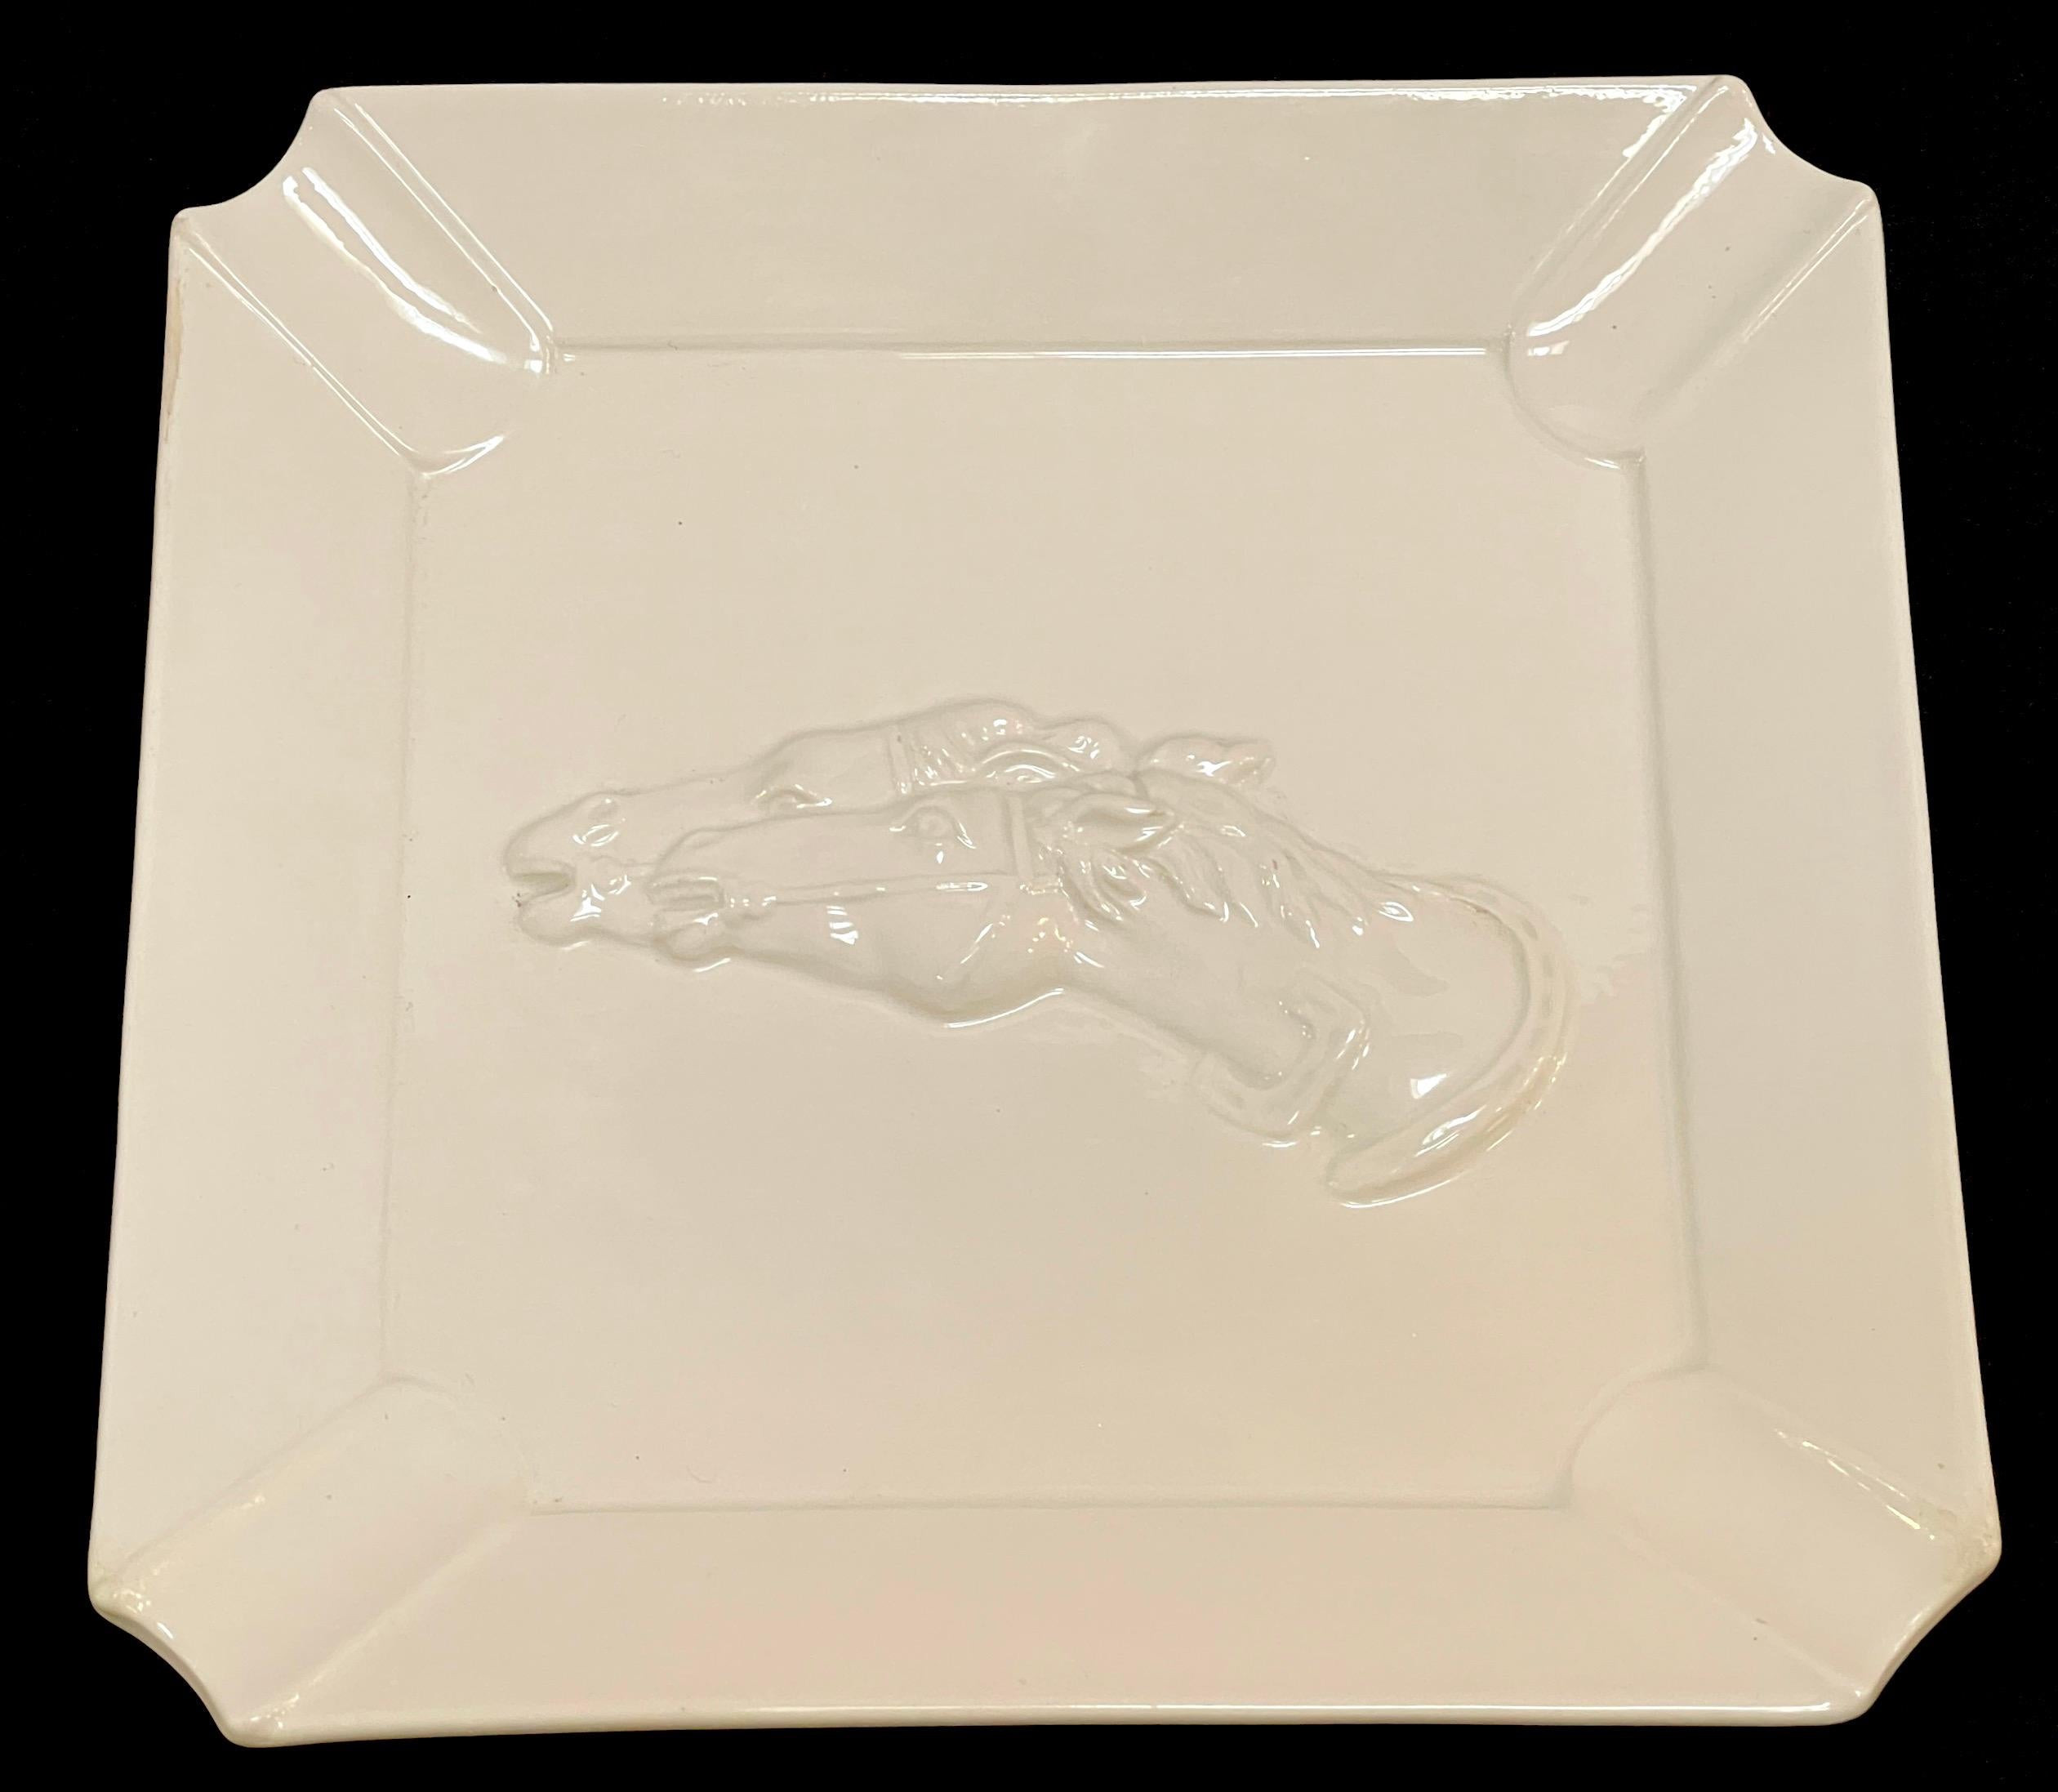 Gucci Blanc de Chine Porcelain Horse Motif Ash/Cigar Tray/ Vide-Poche 
Italy, Circa 1990s

A stunning piece from the 1990s, this Gucci Blanc de Chine porcelain tray features a horse motif and serves as a versatile accessory, functioning as an